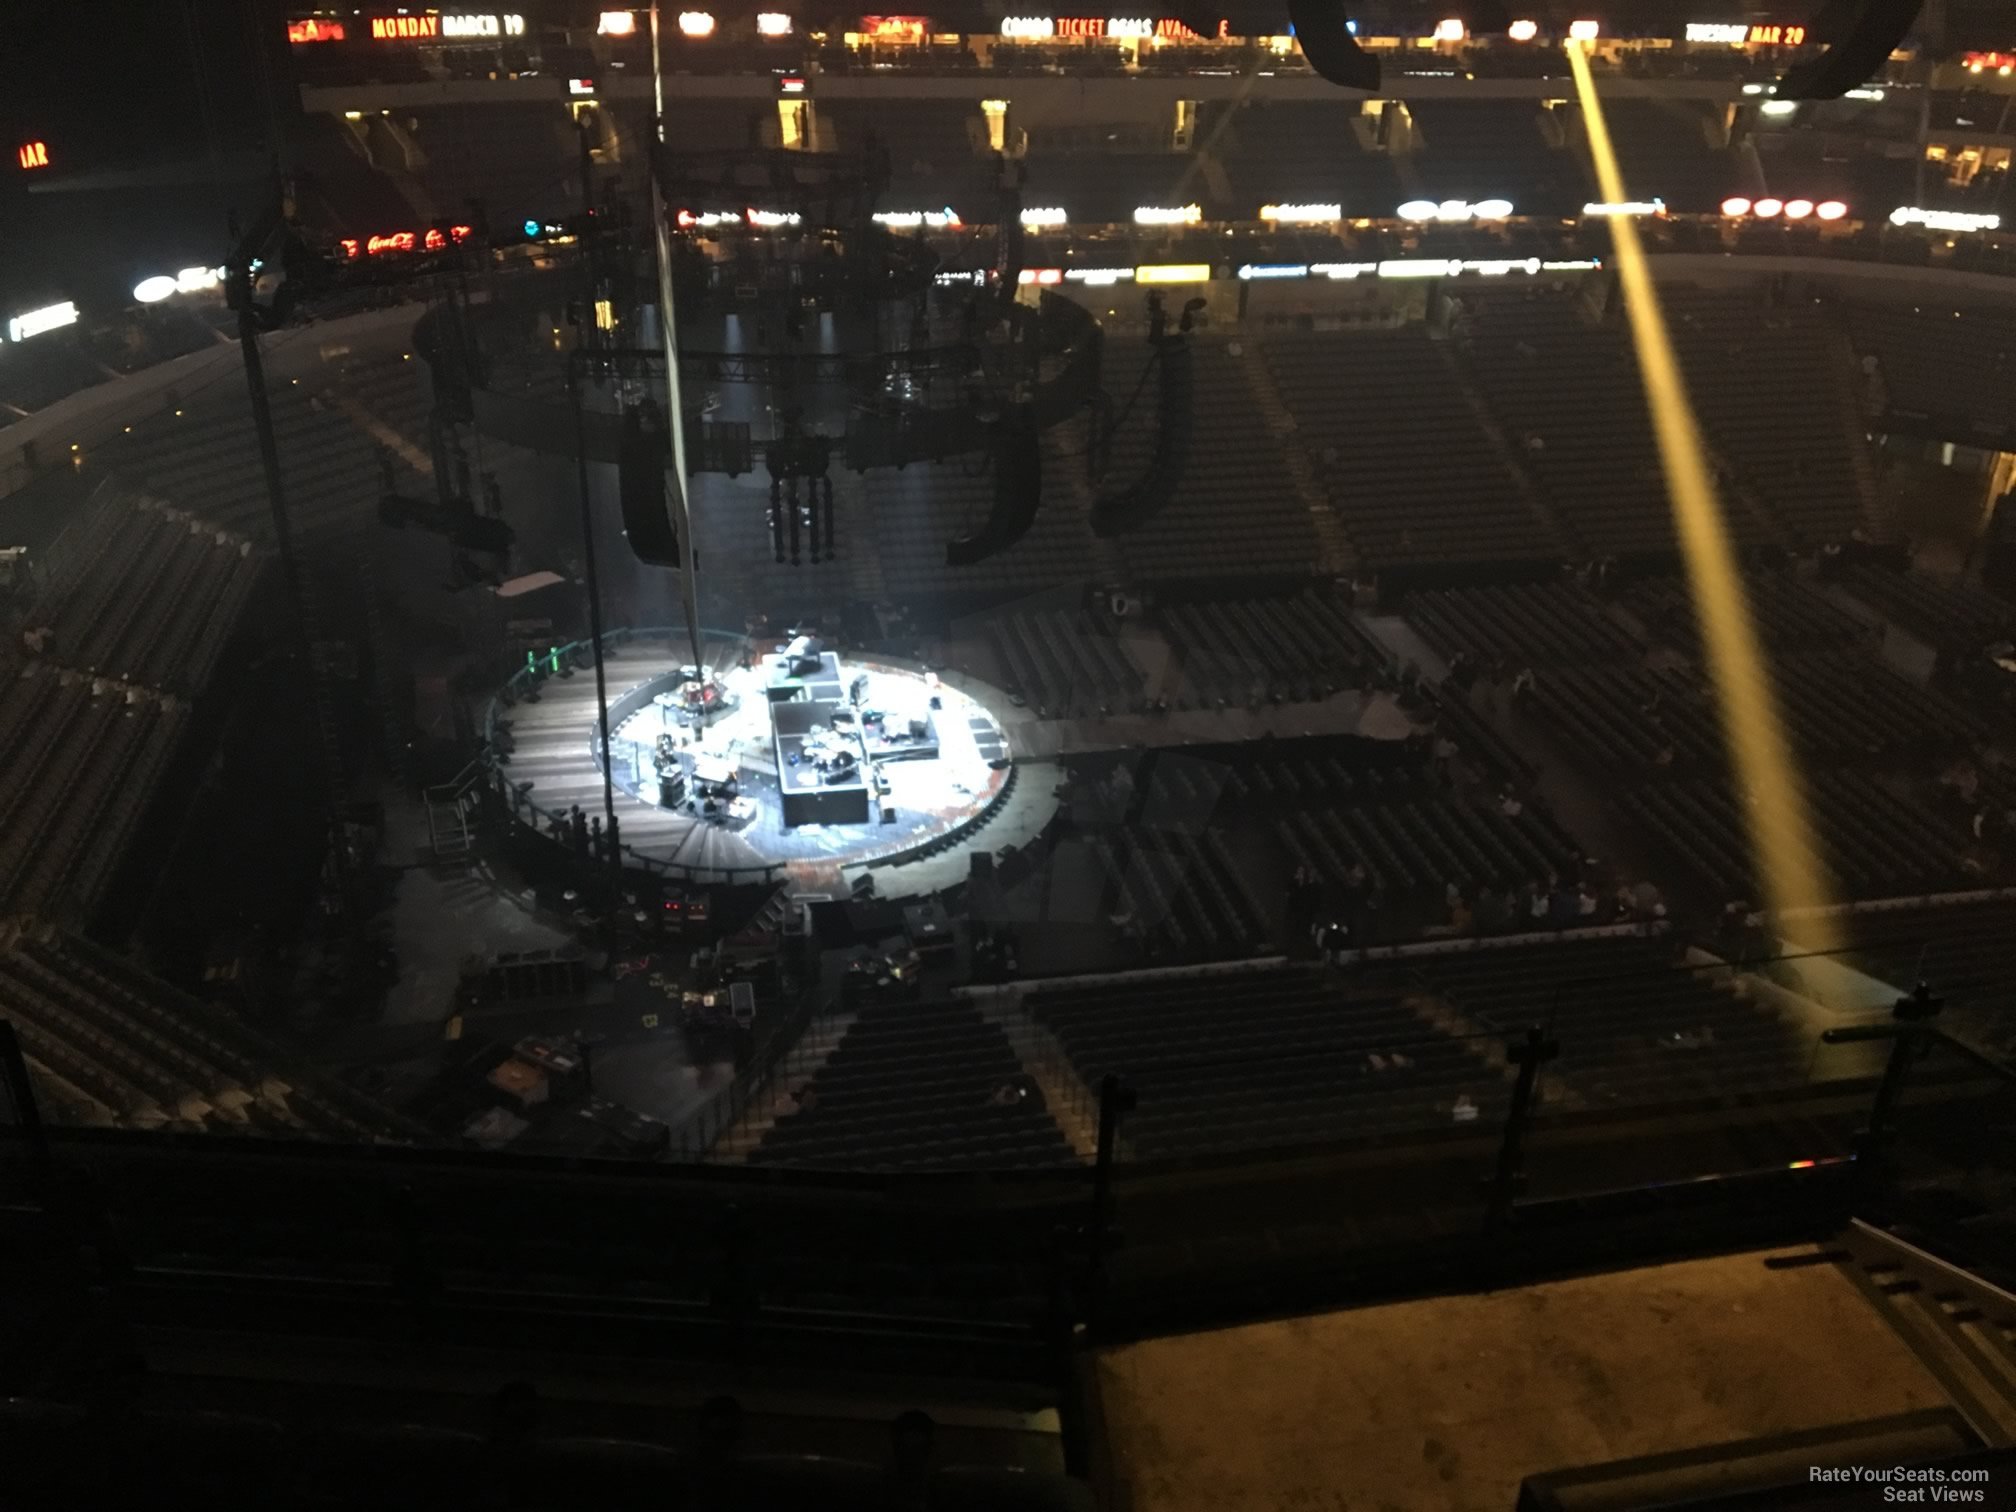 section 329, row k seat view  for concert - american airlines center